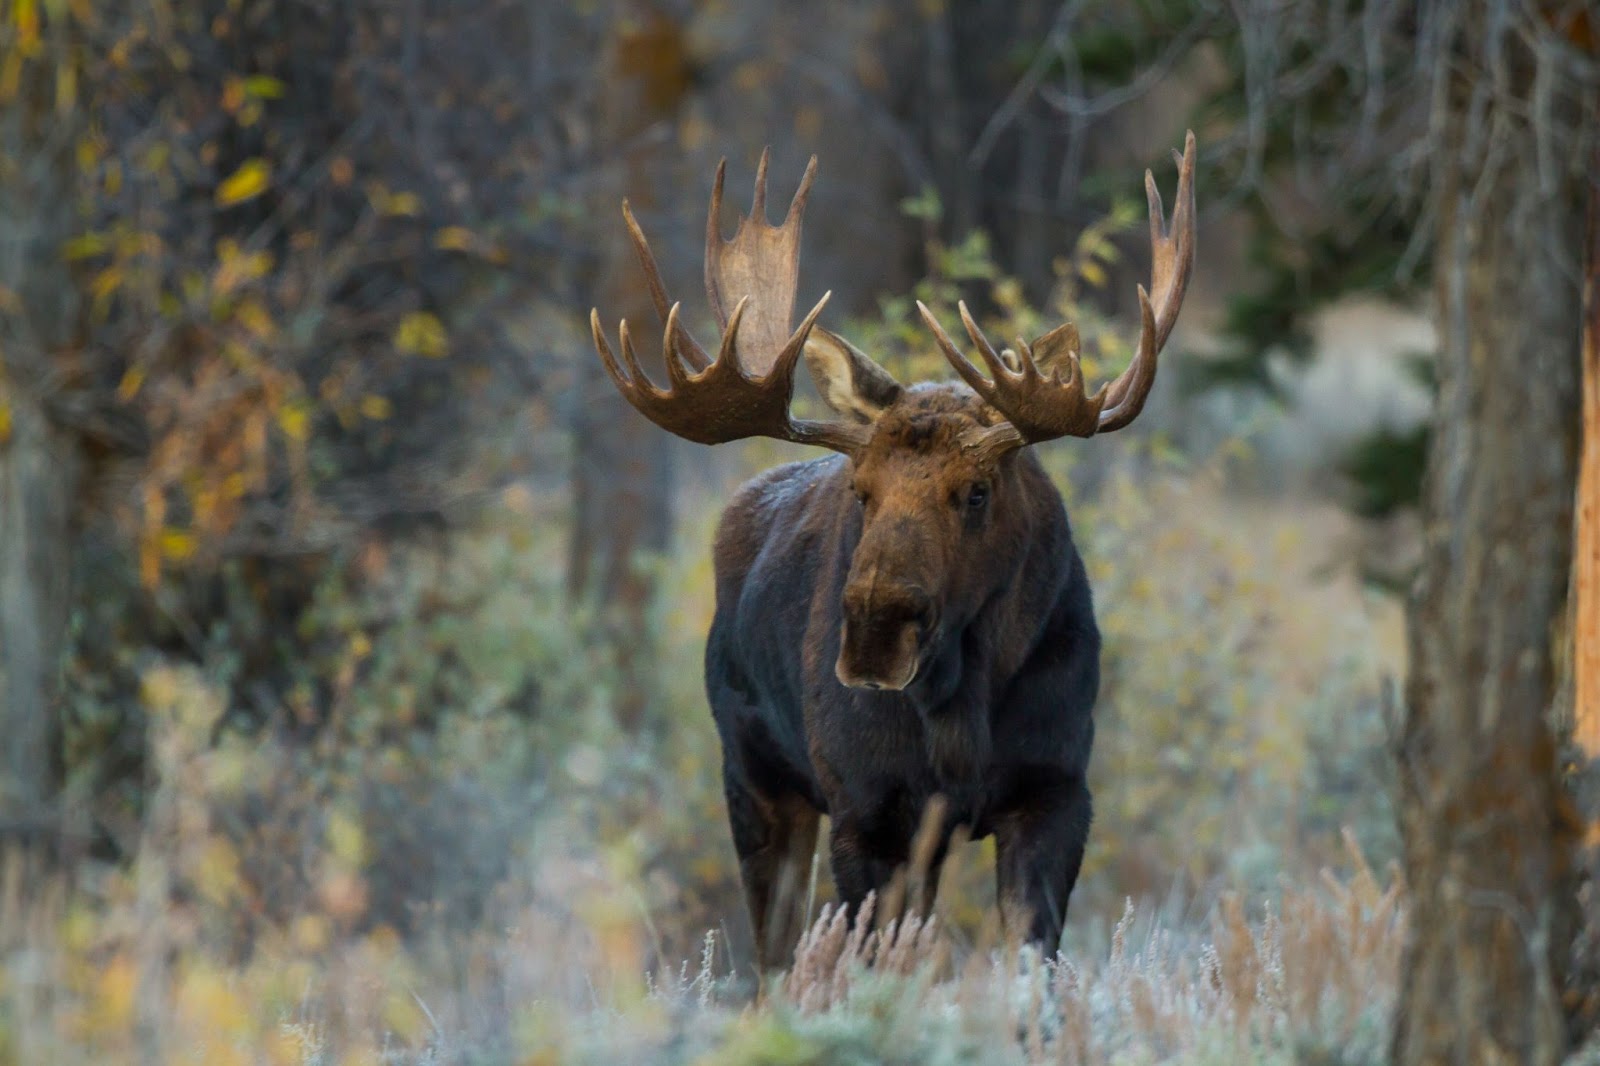 A moose with large antlers walking through the woods in Wyoming during a guided hunt.